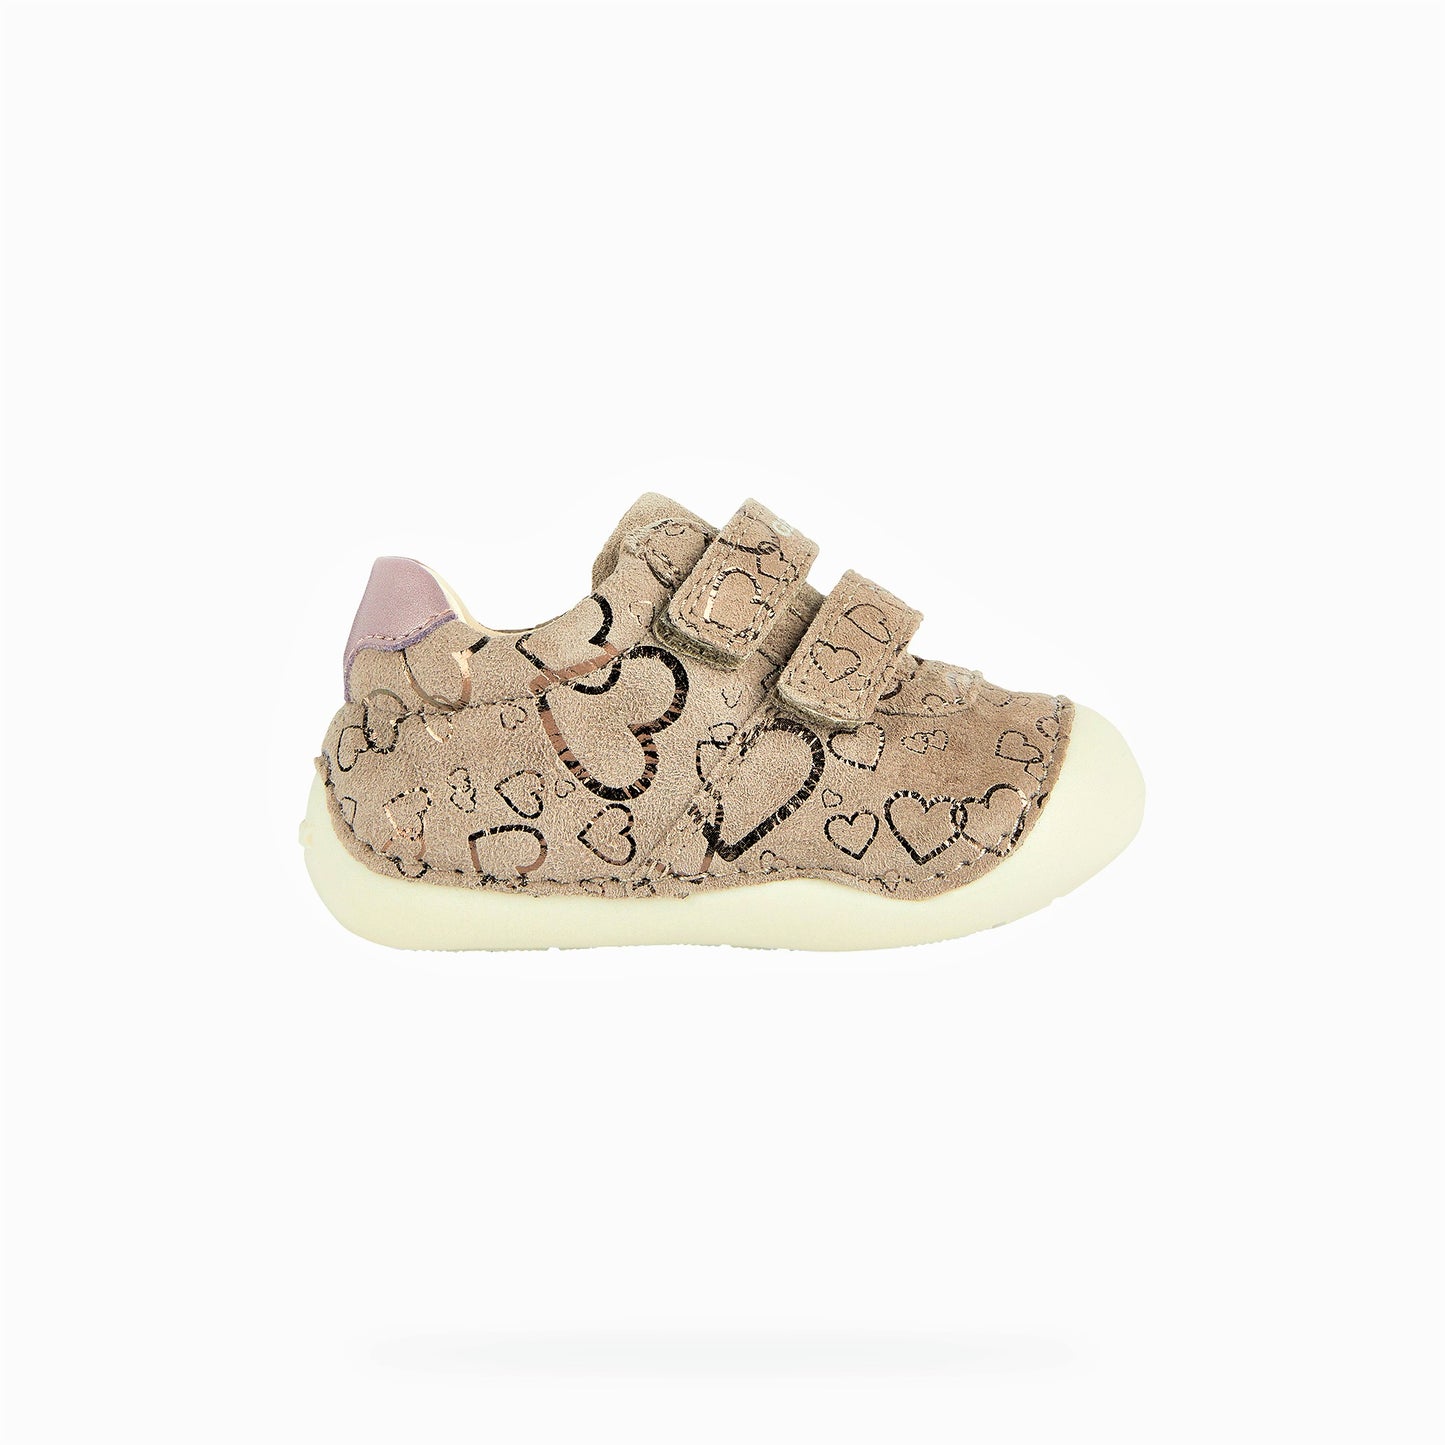 A girls Pre-walker by Geox, style B Tutim Girl, velcro fastening, in pink suede with metallic heart print. Right side view.